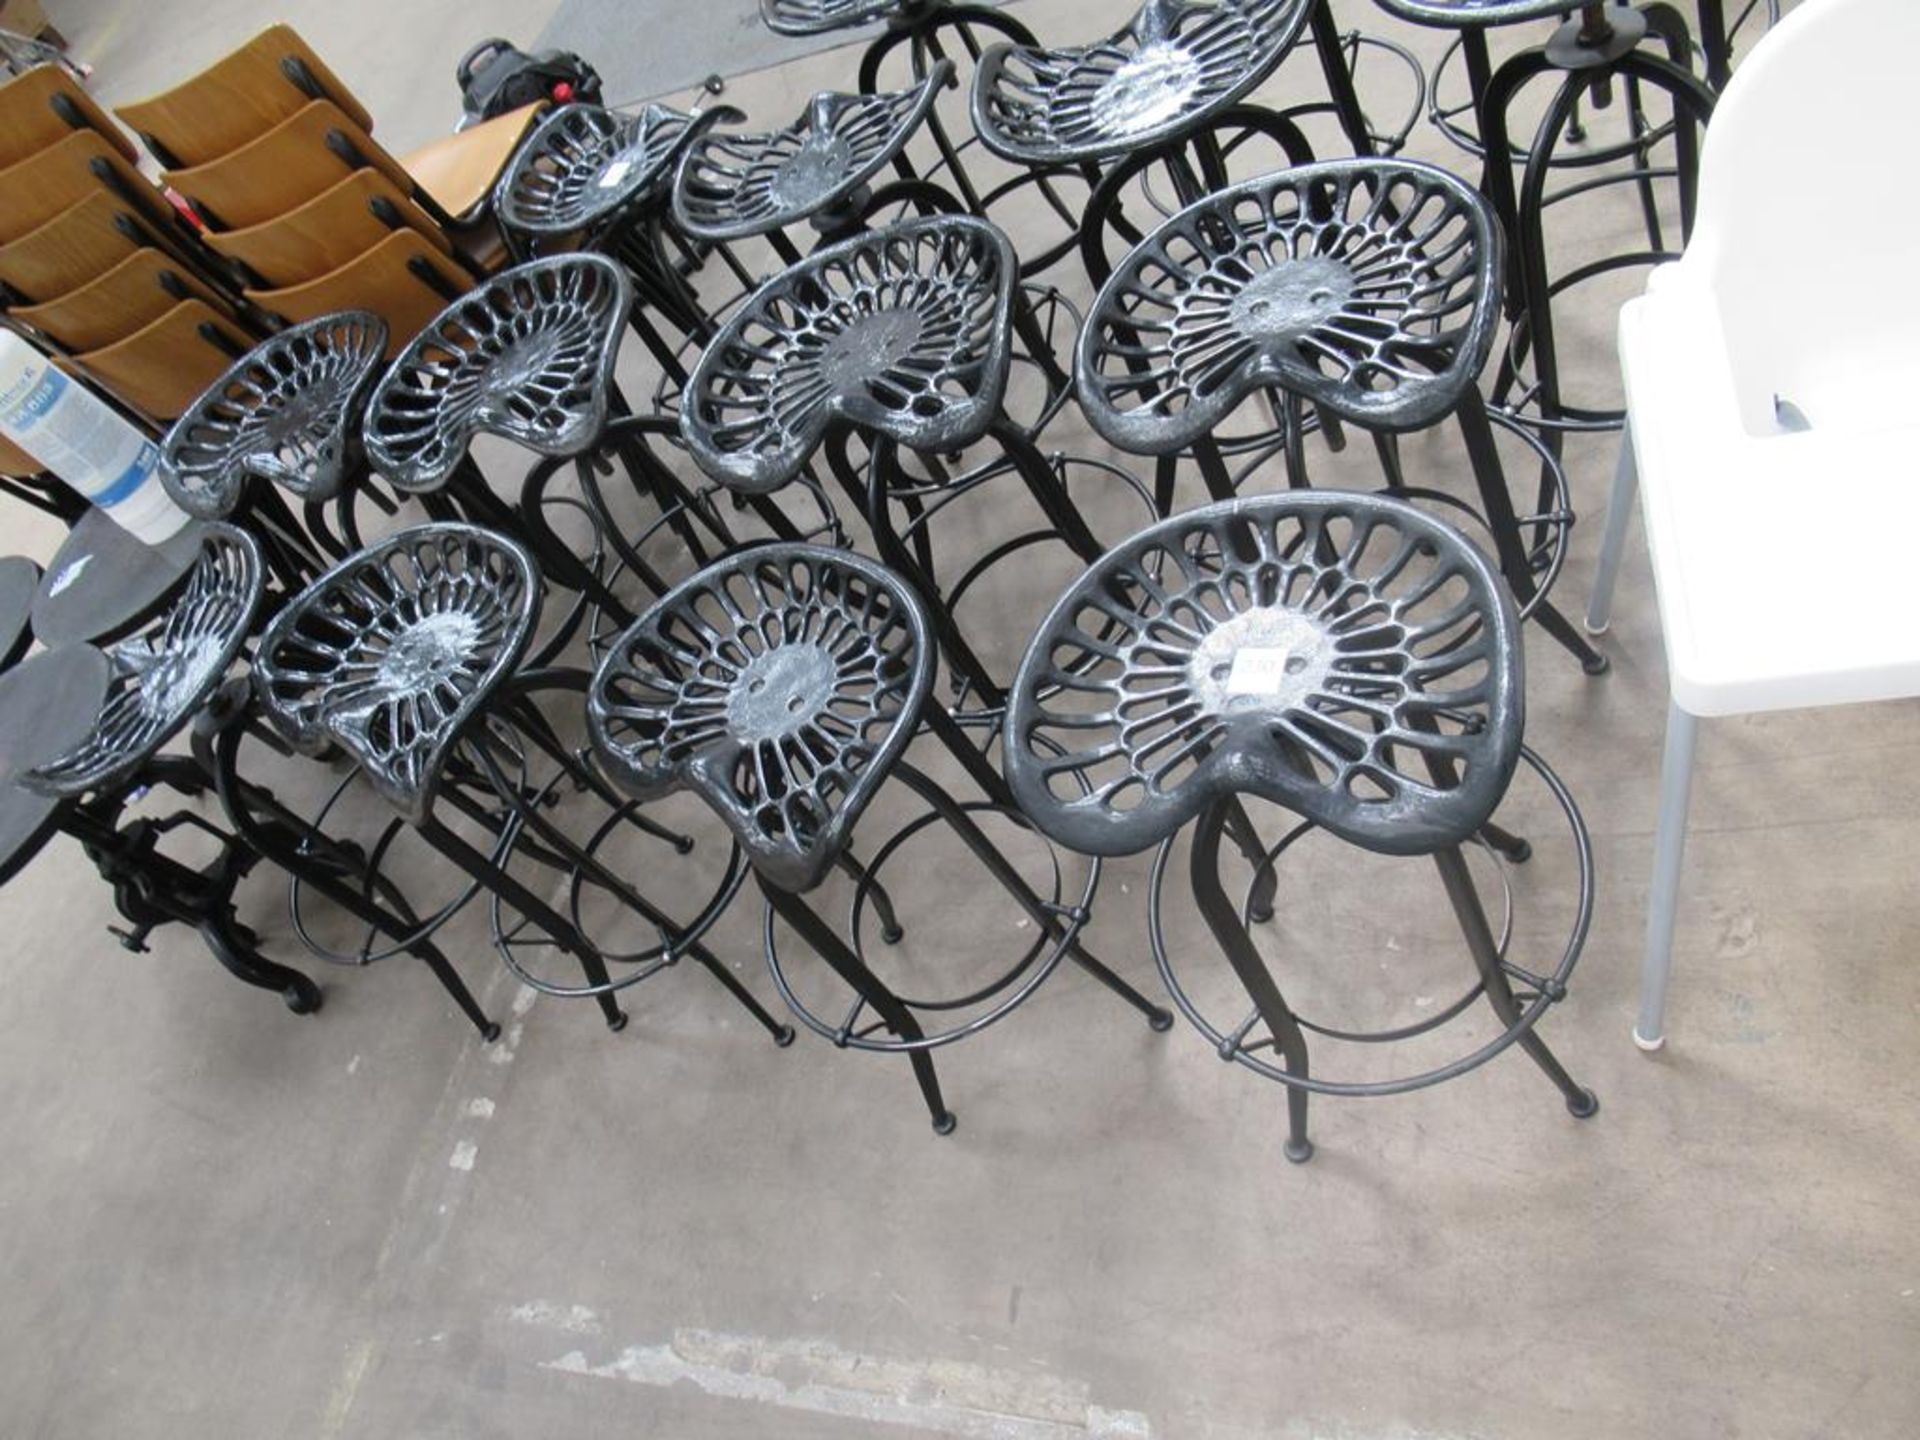 8 x Tractor Seat Stools